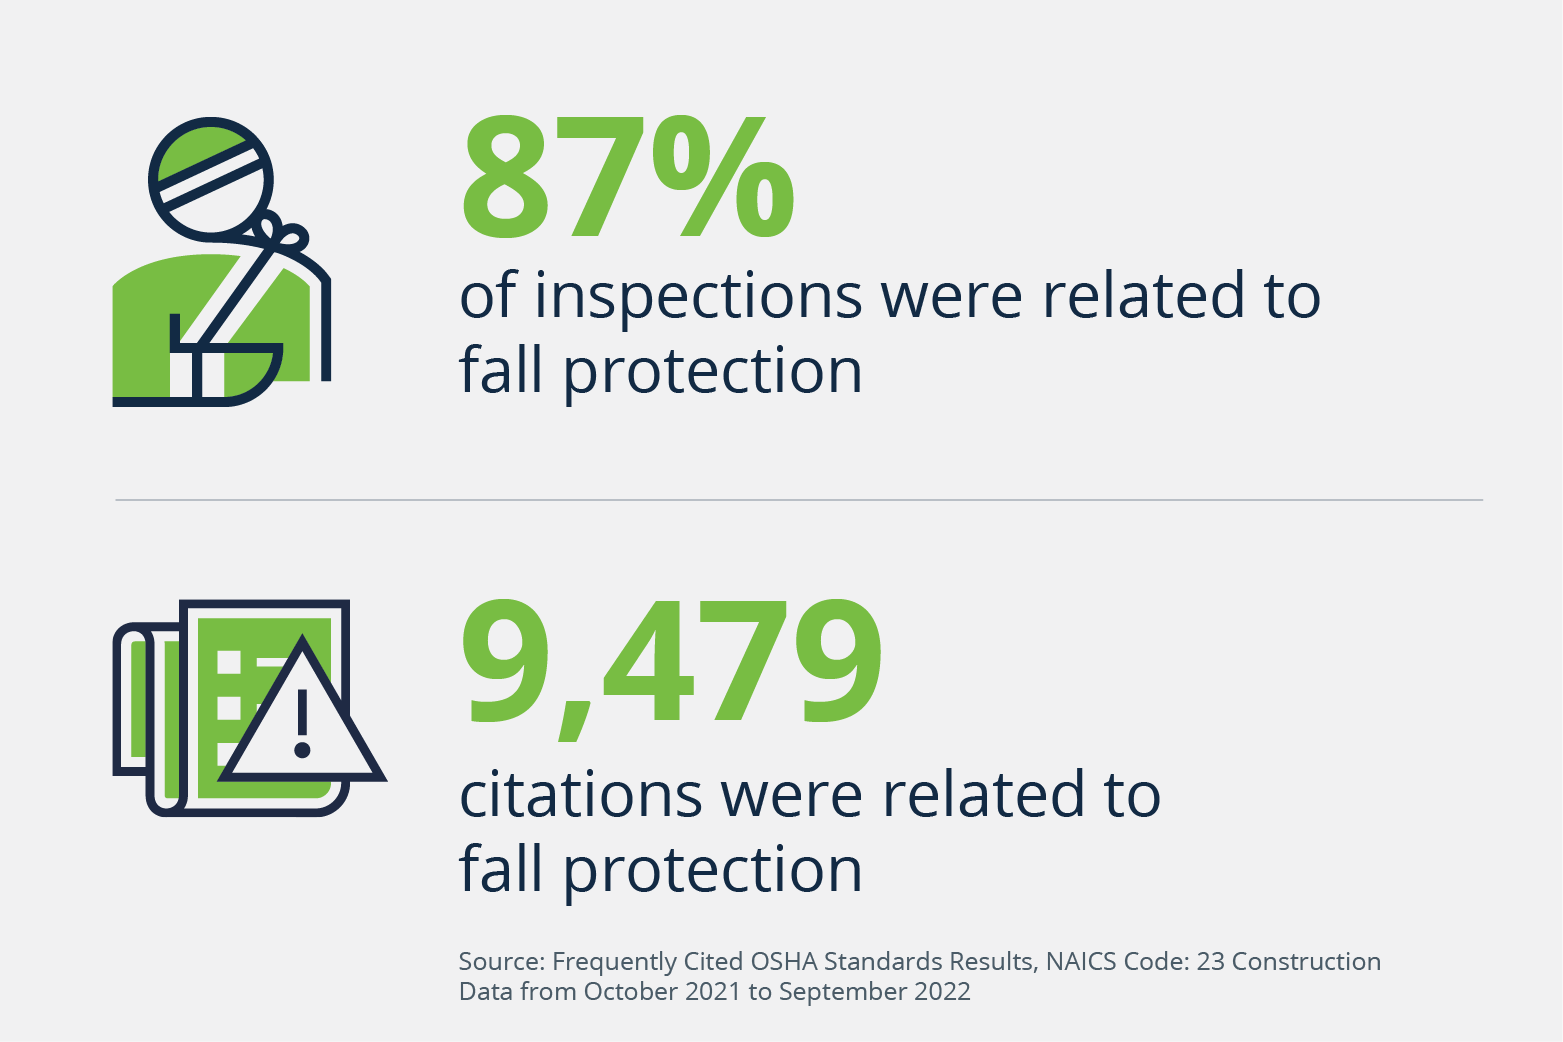 87% inspections related to fall protection